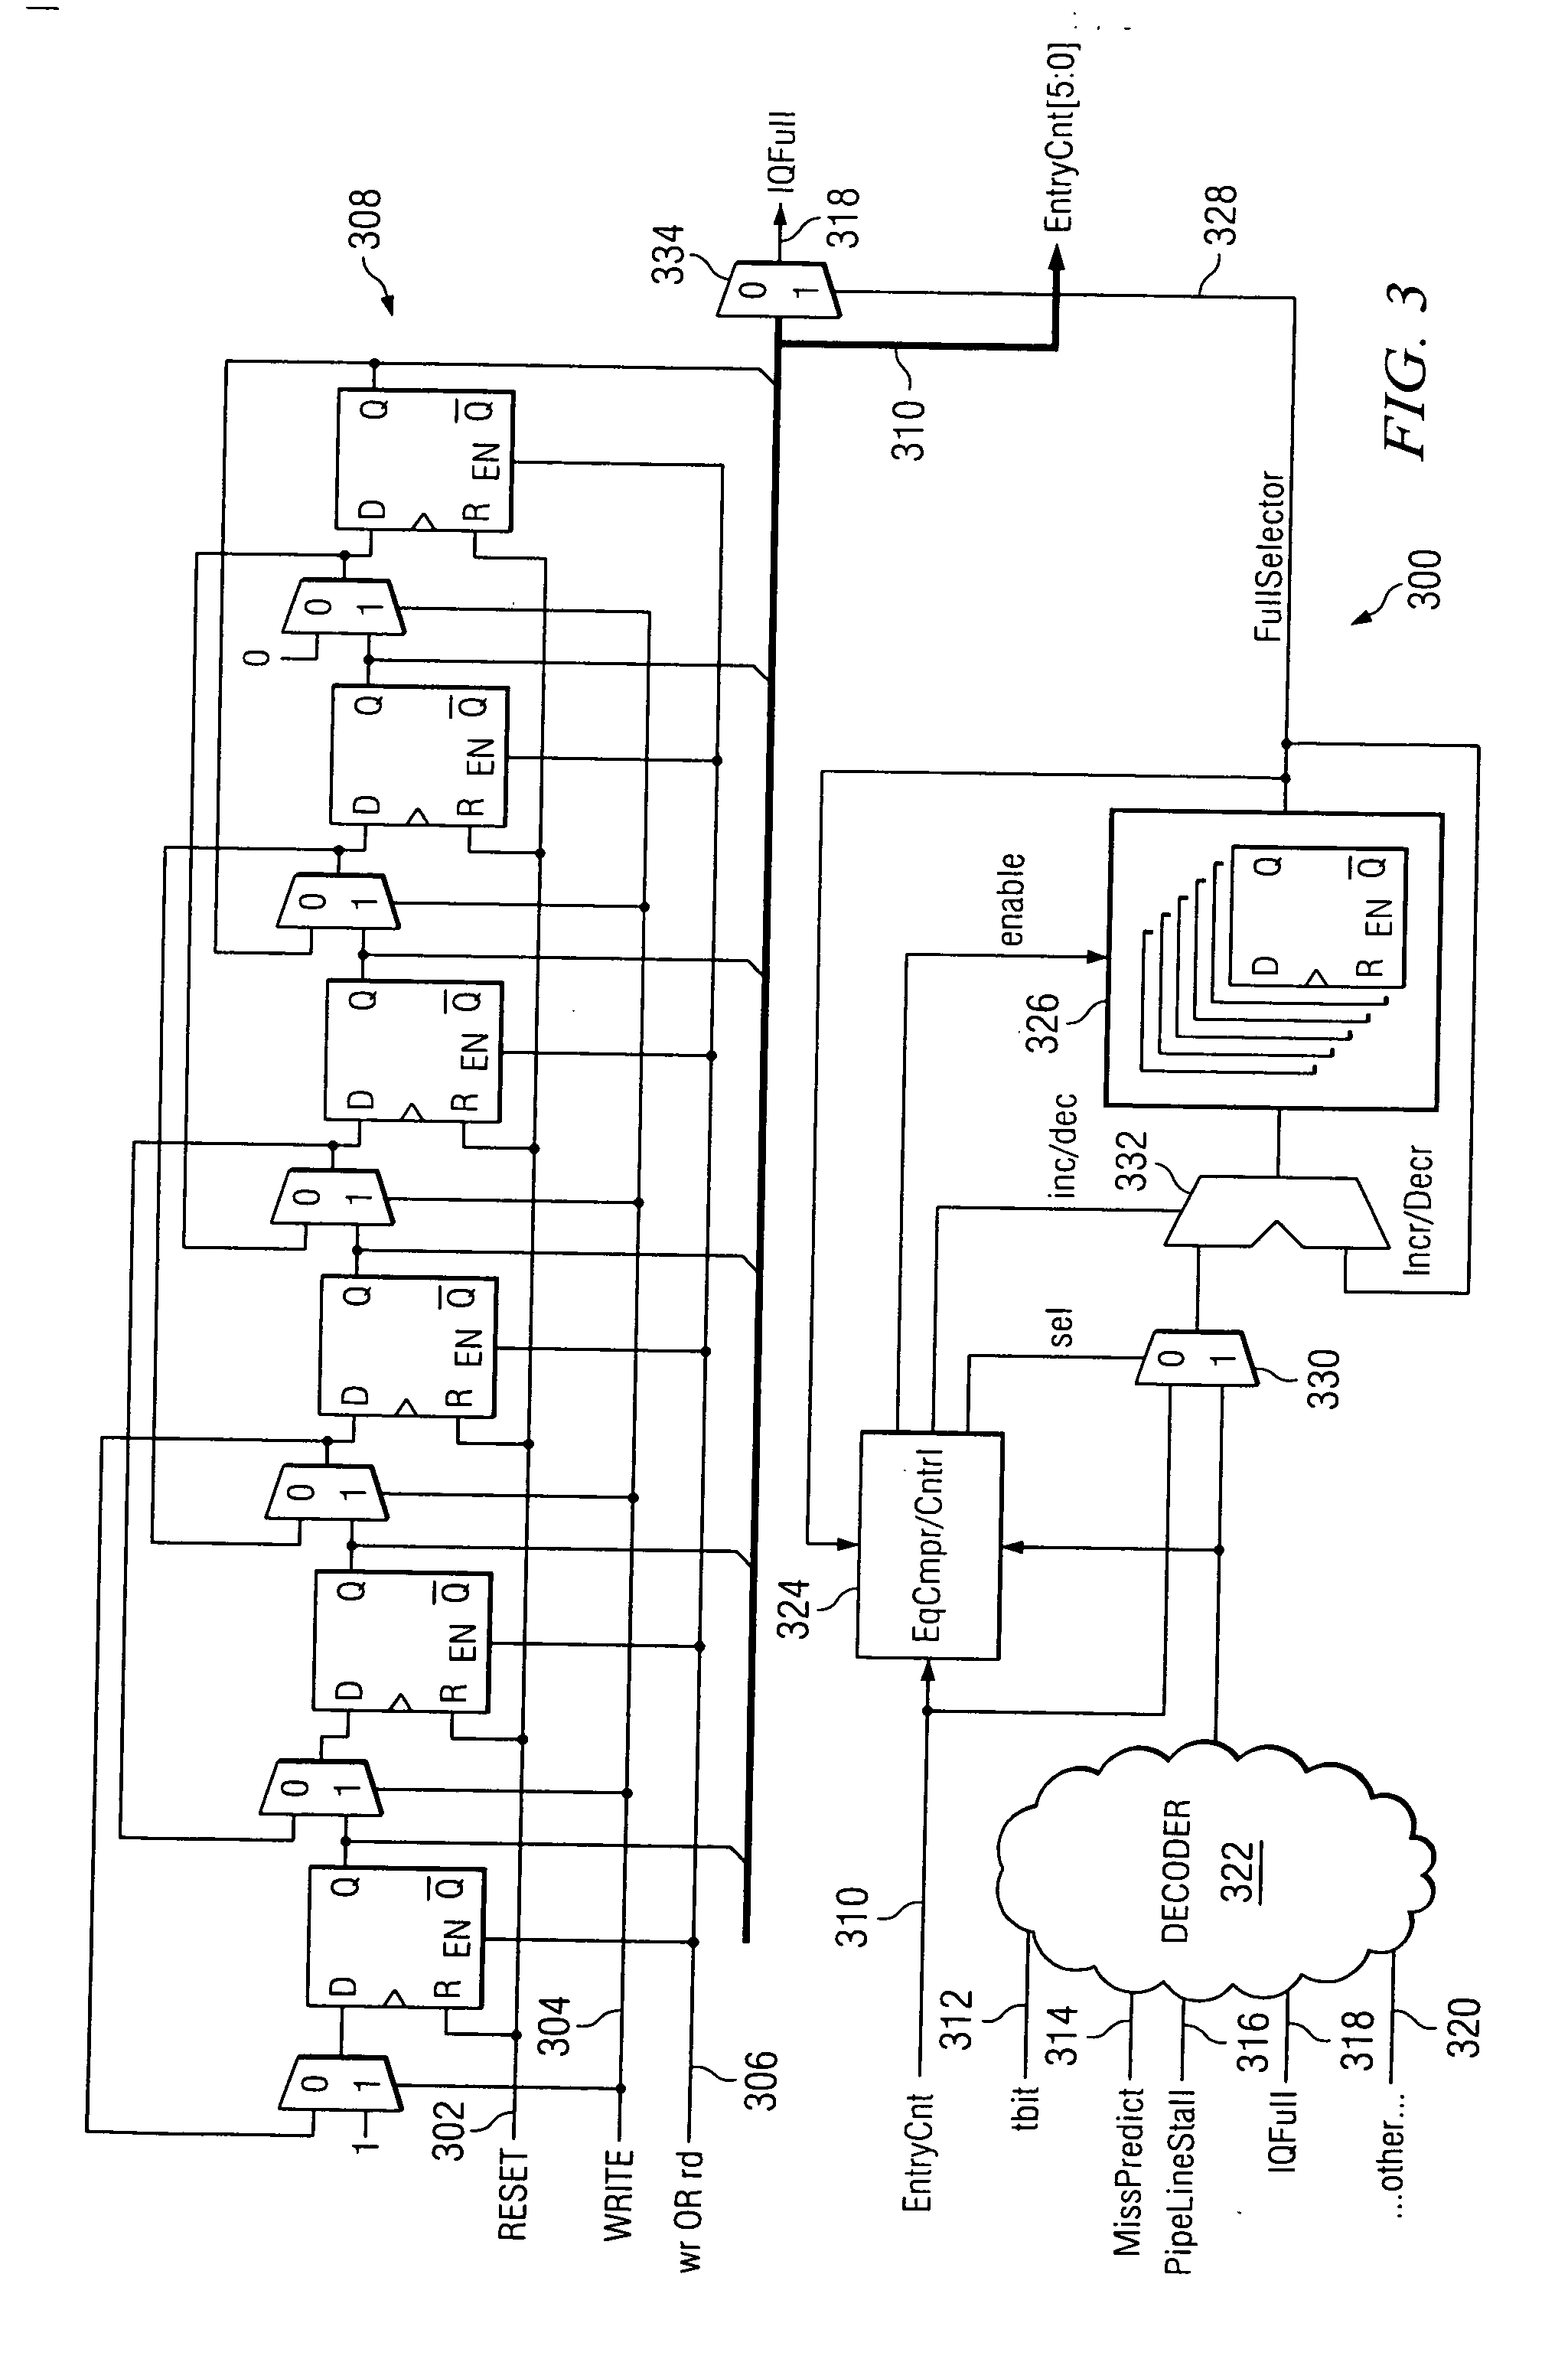 Method and apparatus for adaptive buffer sizing